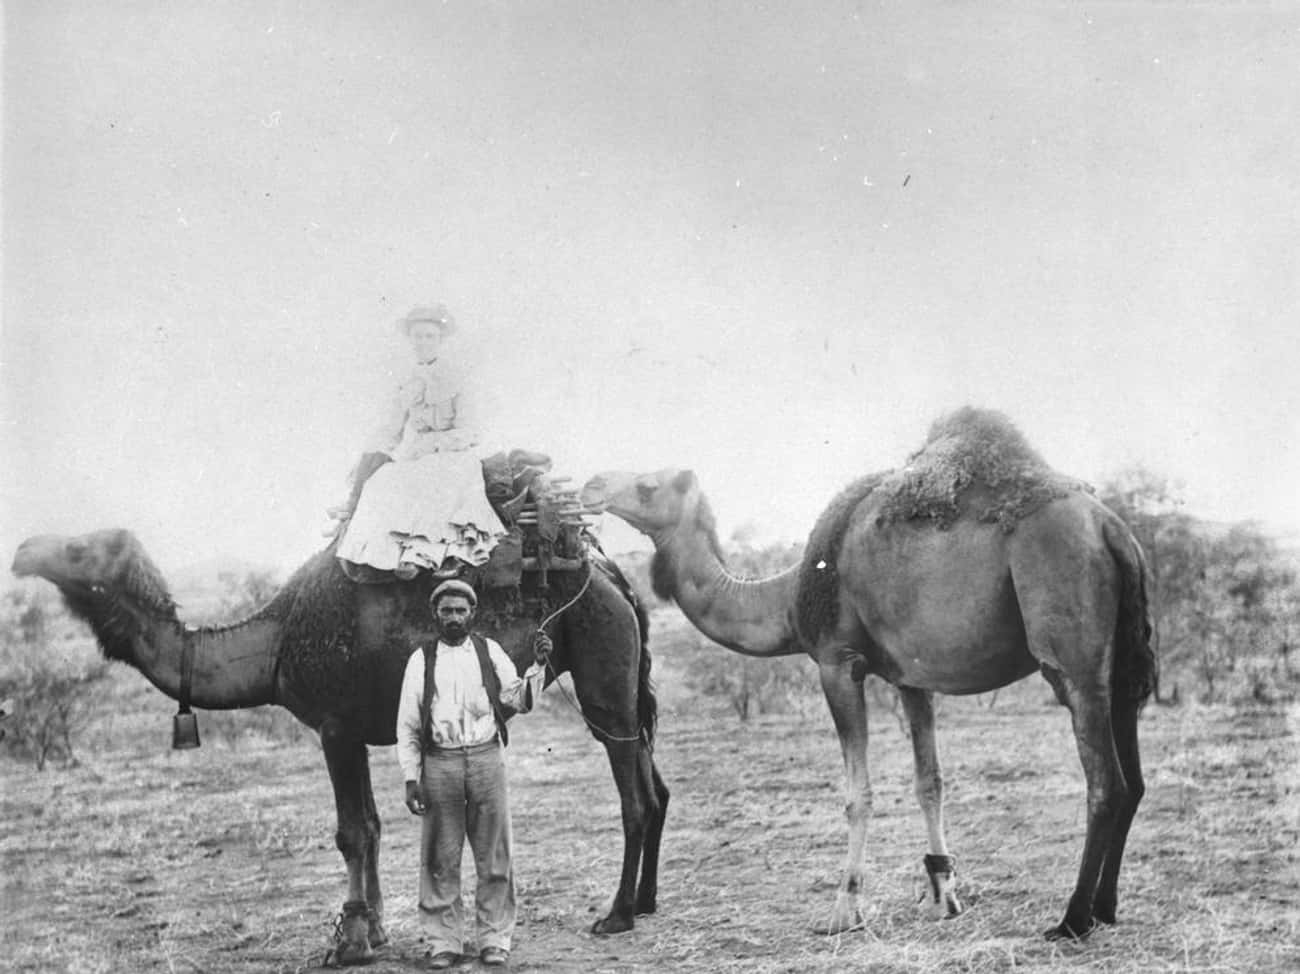 Congress Set Aside $30,000 To Buy Camels In 1856